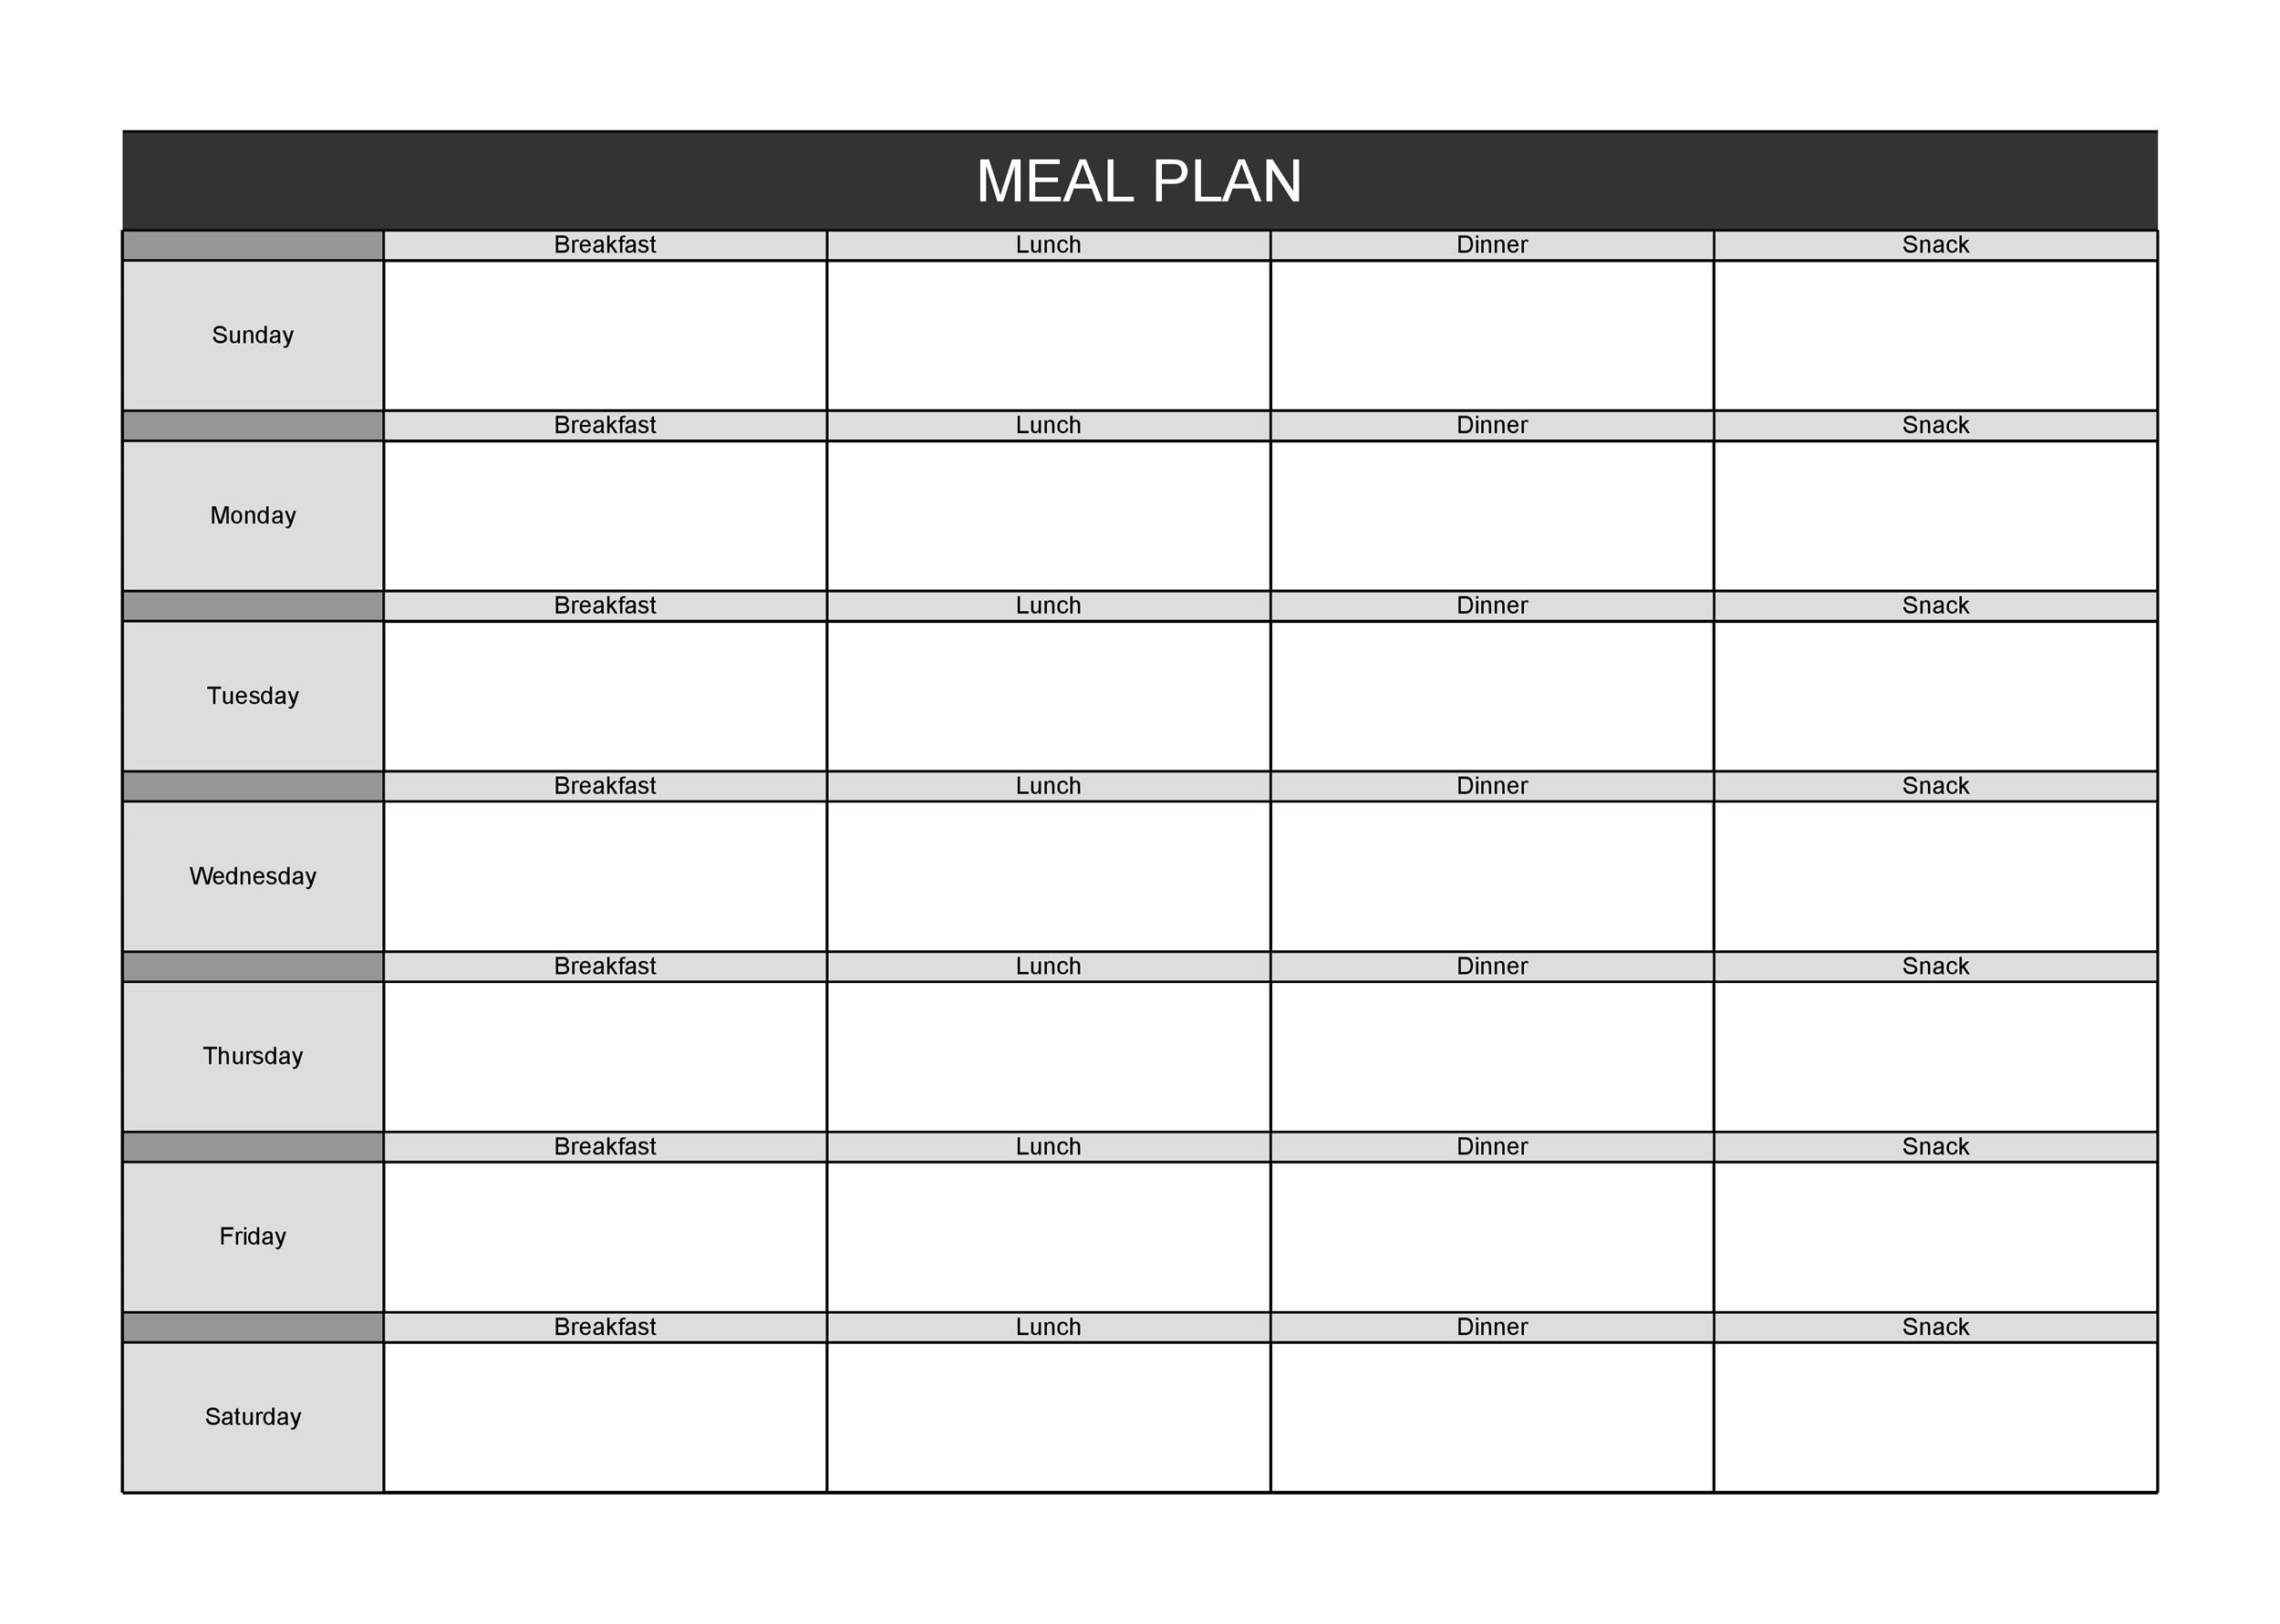 40-weekly-meal-planning-templates-templatelab